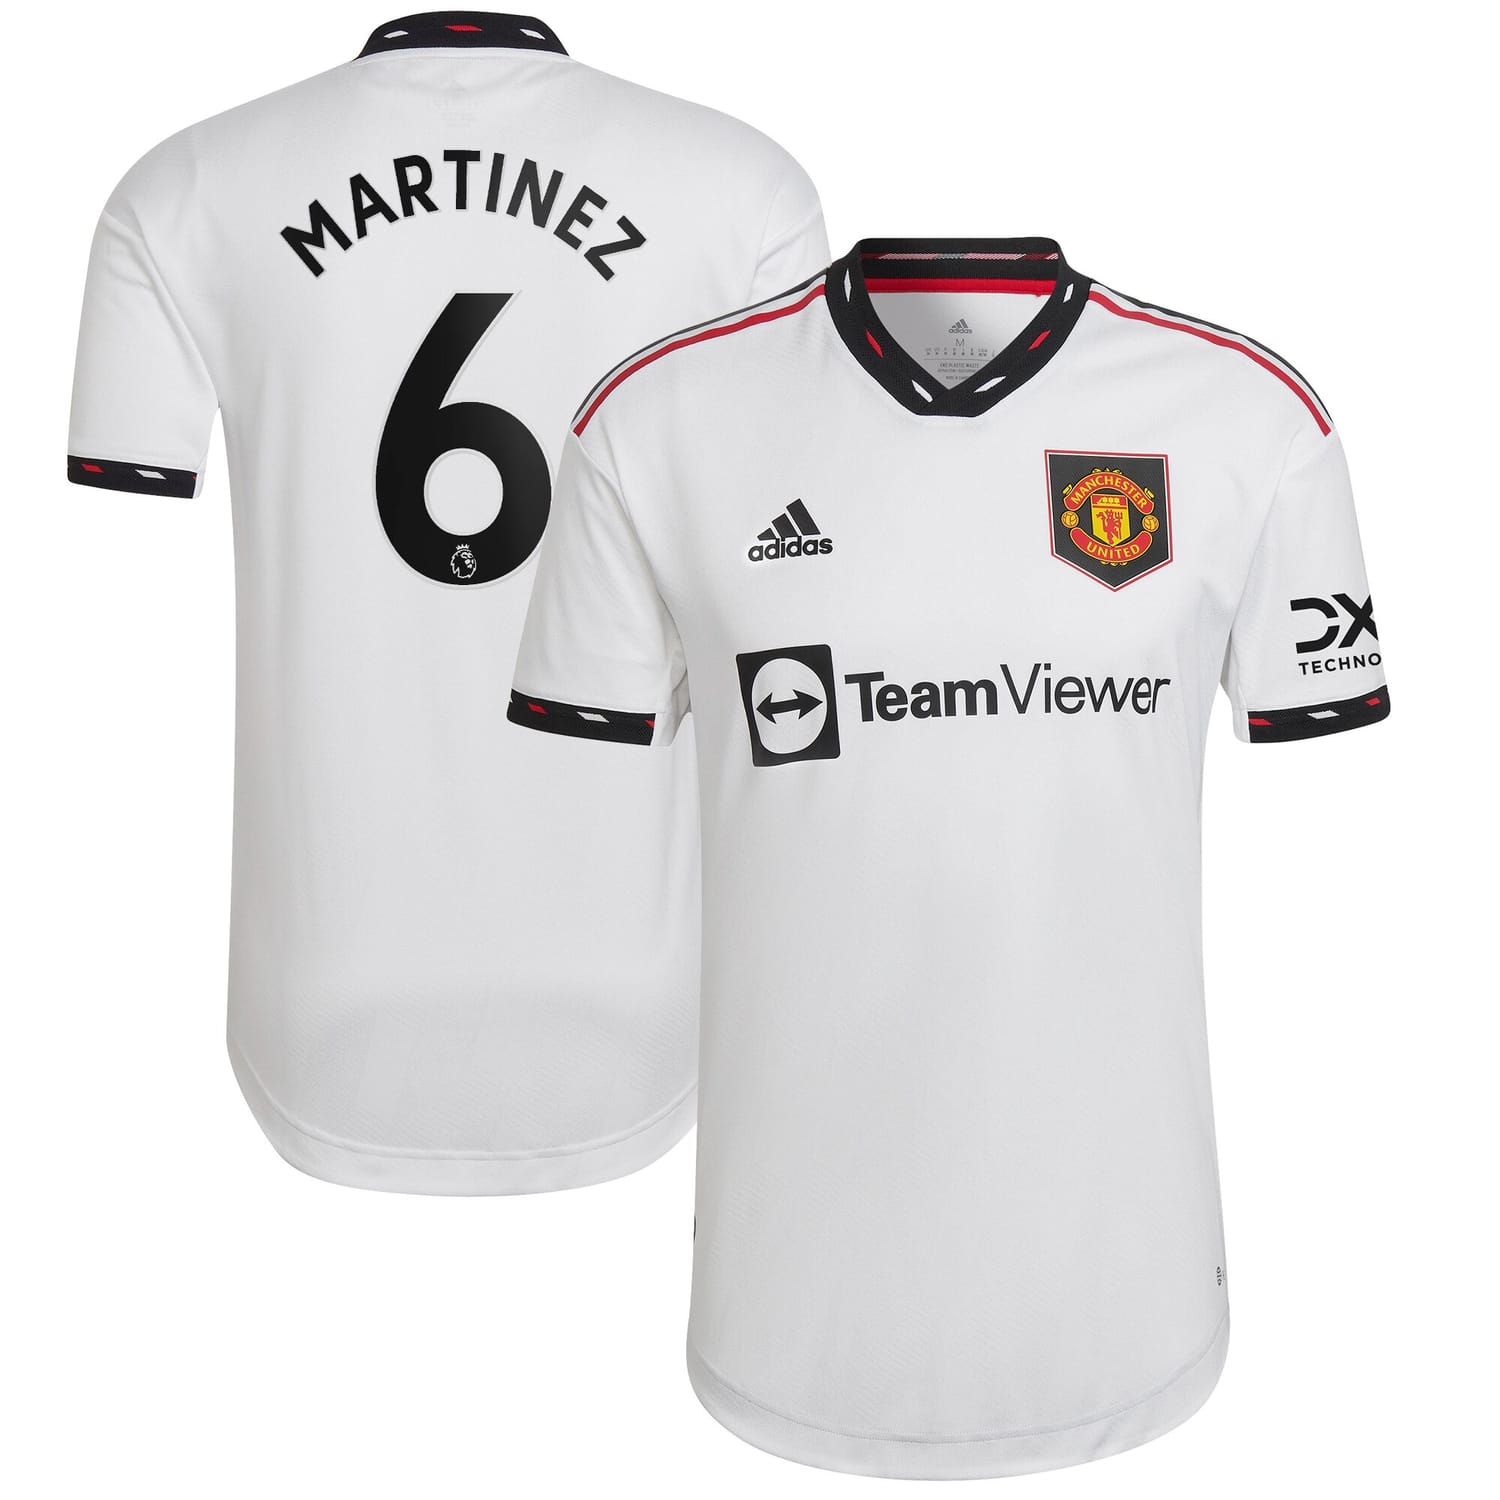 Premier League Manchester United Away Authentic Jersey Shirt 2022-23 player Lisandro Martínez 6 printing for Men